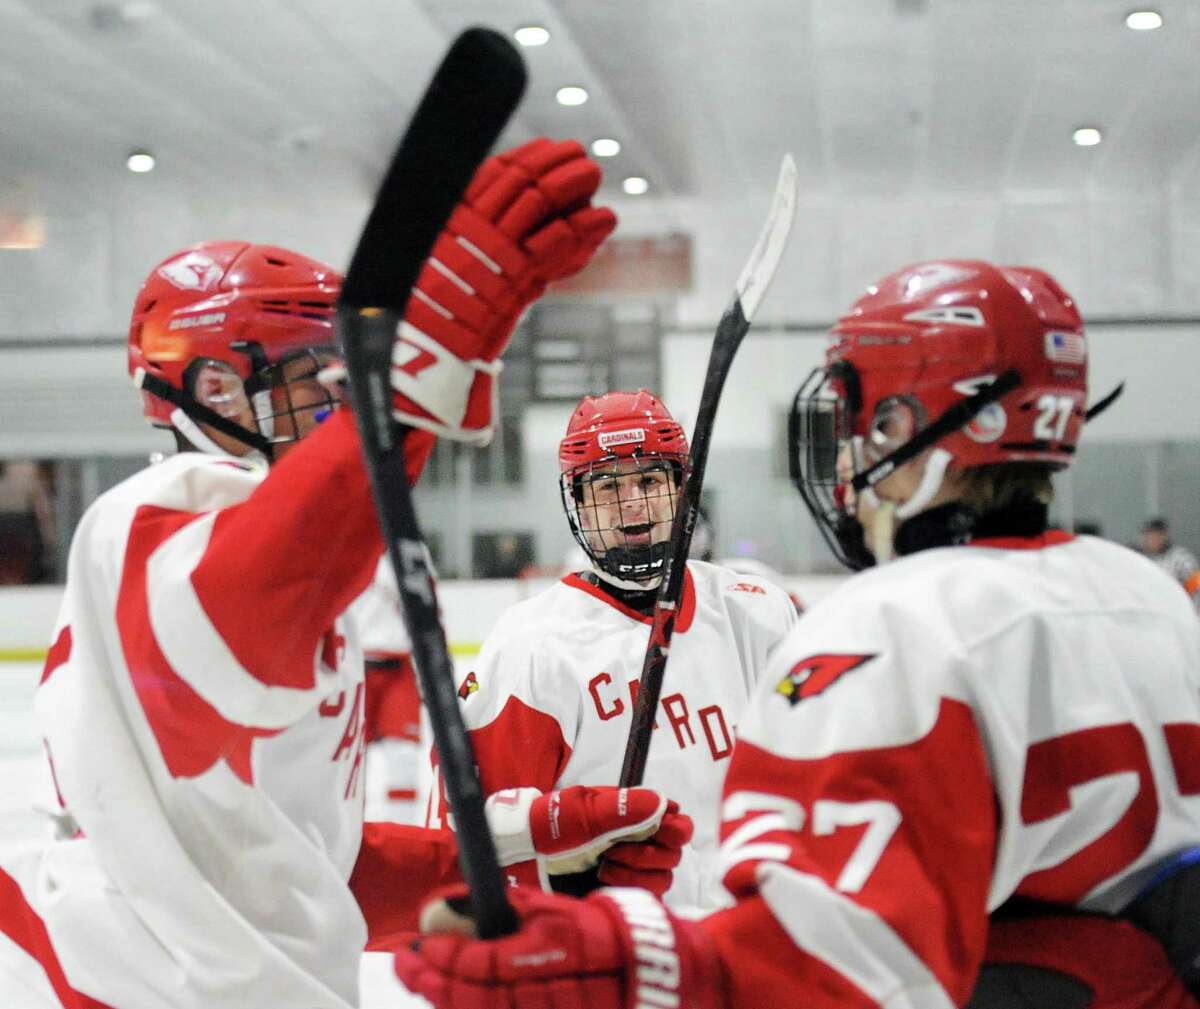 At center, Greenwich’s Matthew Davey smiles after teammate Nicolas Pelletier-Martinelli, left, scored a second period goal. Joining the celebration at right is Nikita Kovalev on Wednesday in Greenwich.